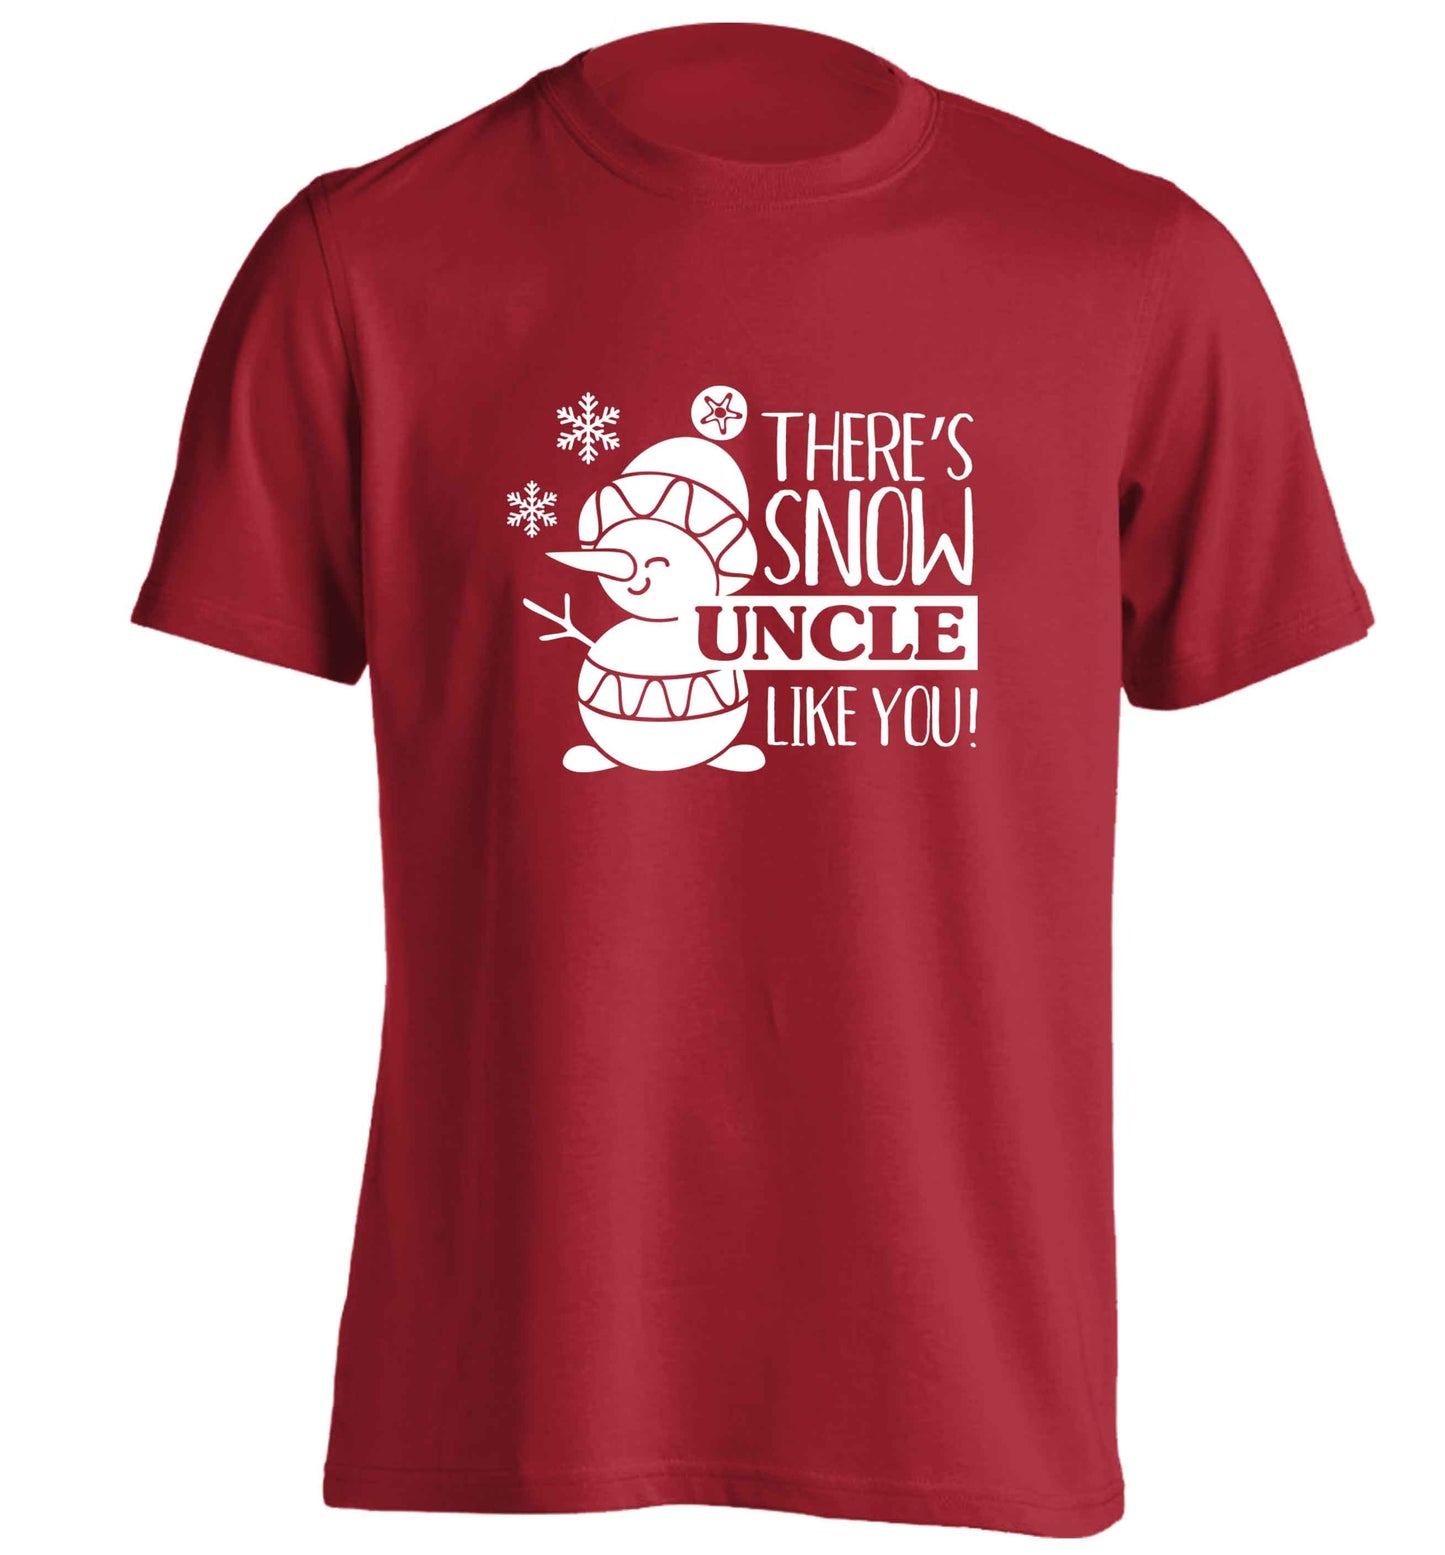 There's snow uncle like you adults unisex red Tshirt 2XL